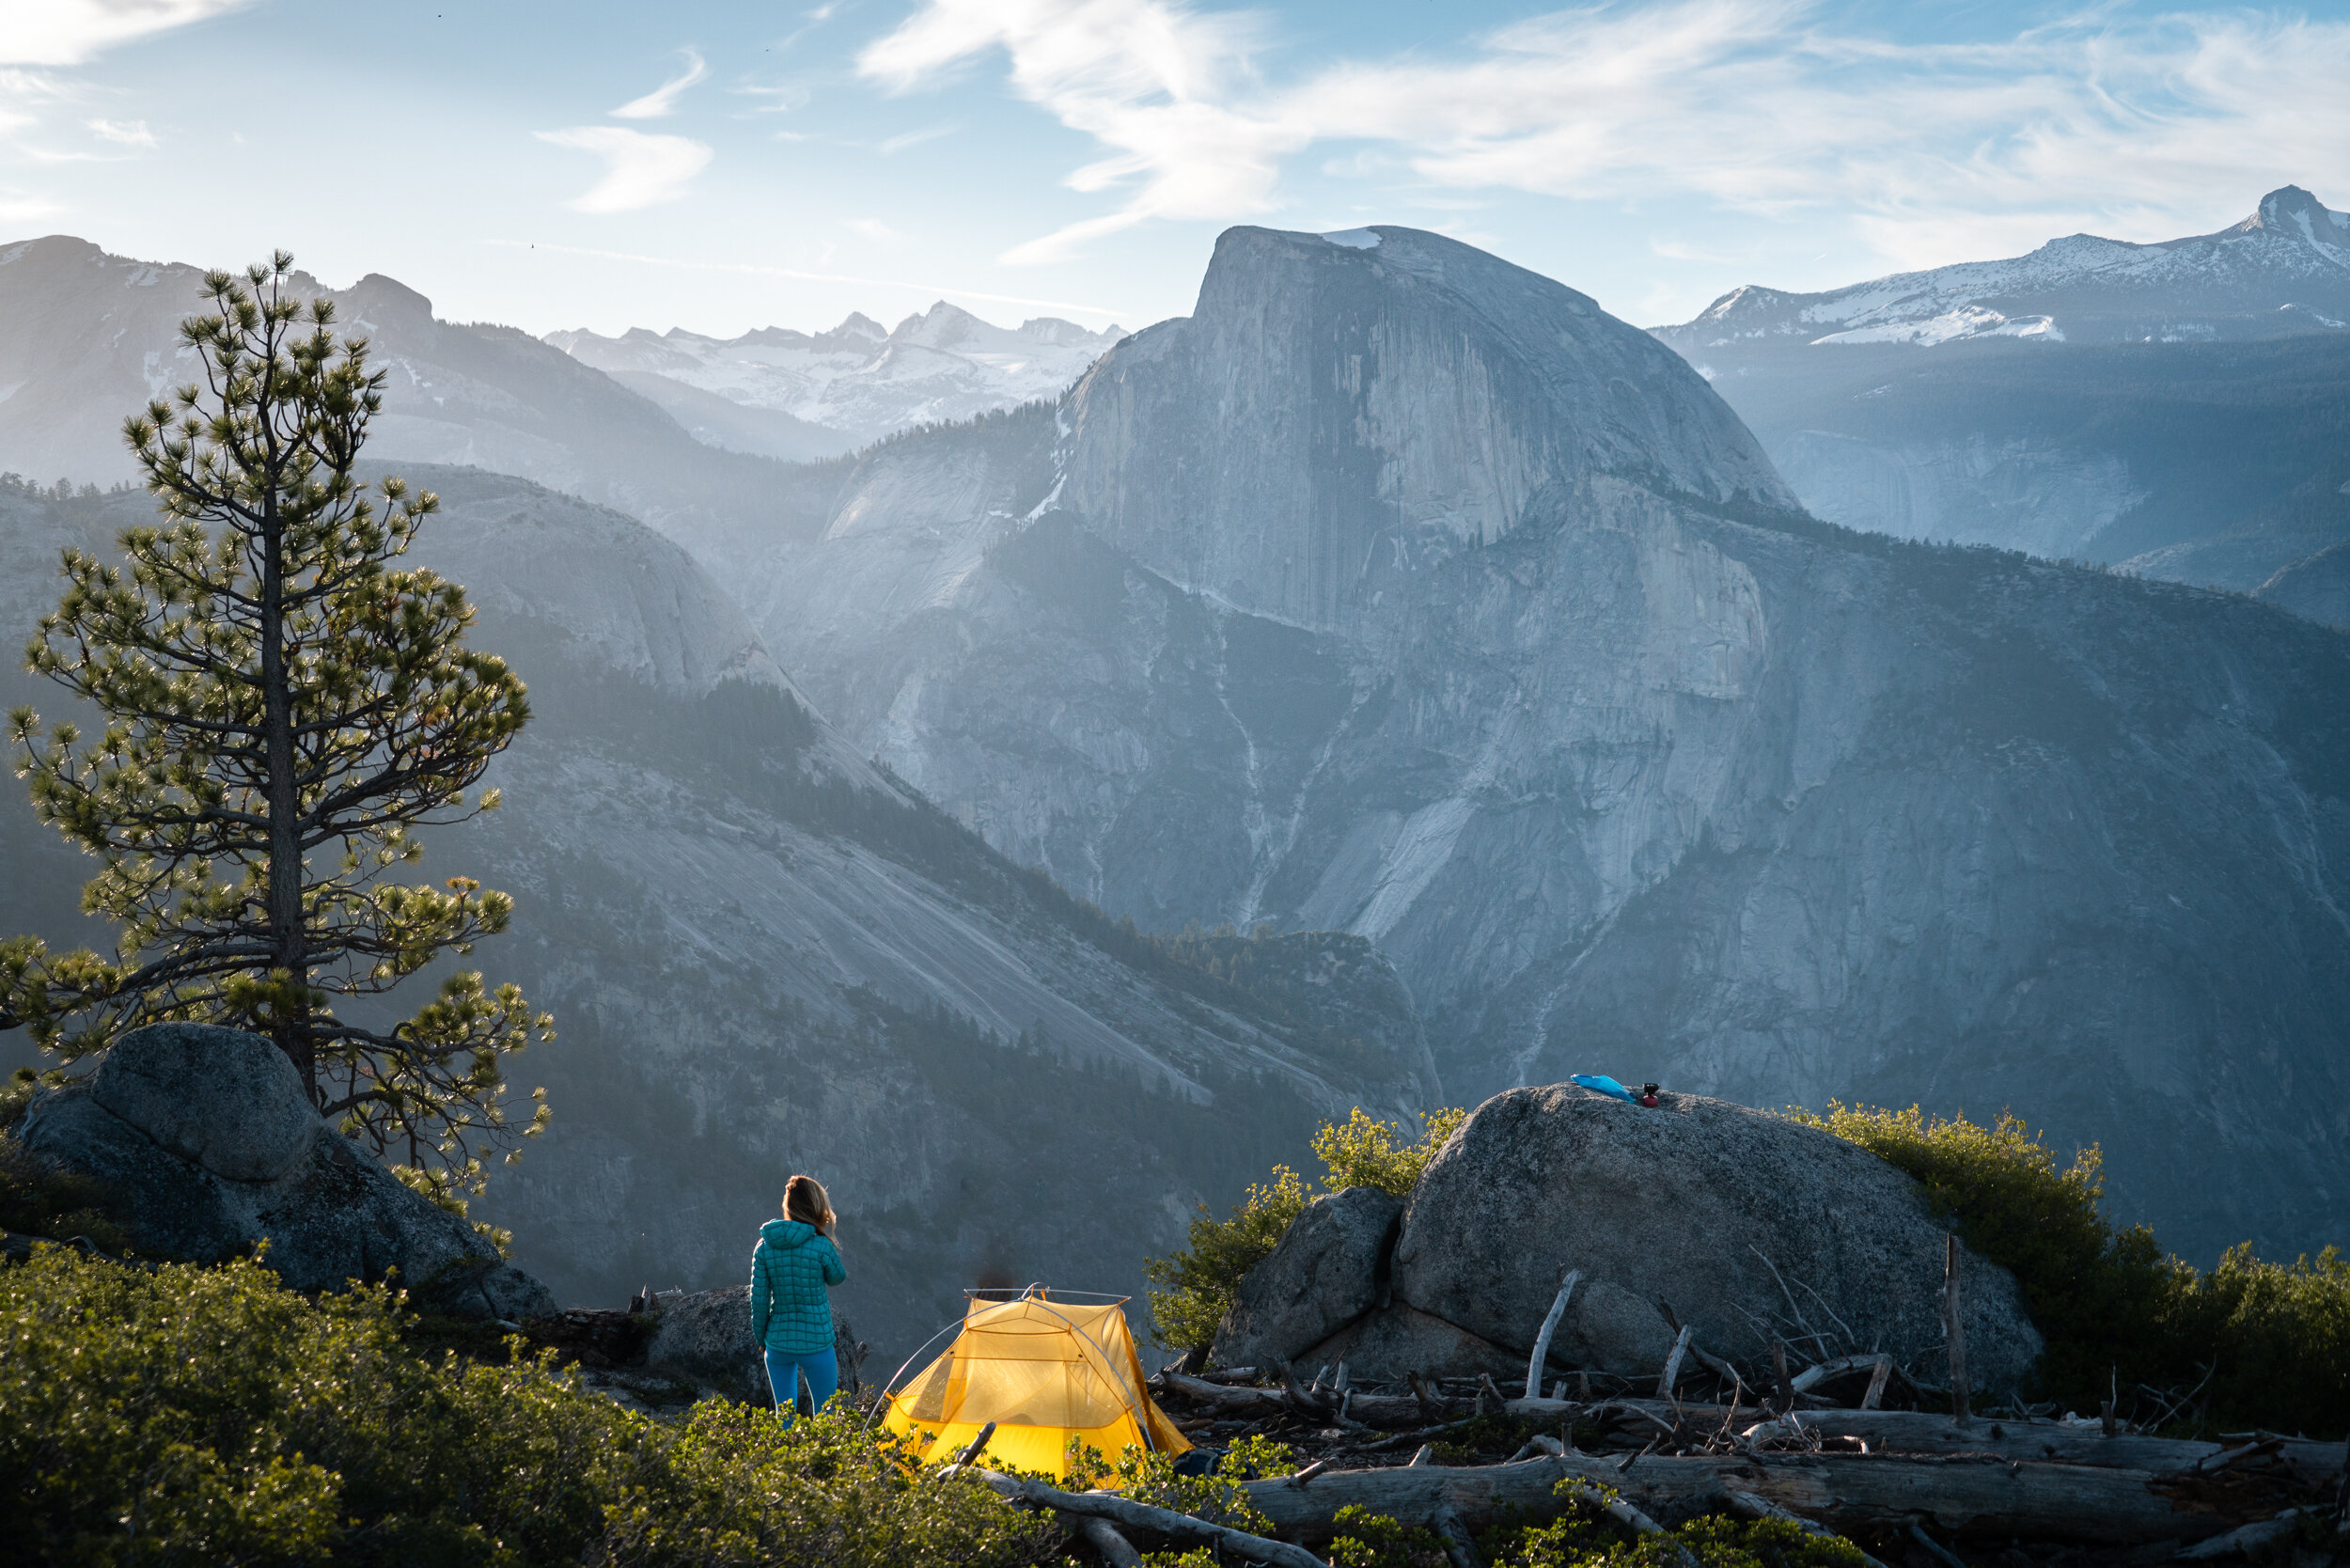 It’s not hard to find a camp spot with a view at Yosemite National Park. Tent:  Big Agnes Tiger Wall UL2 Tent